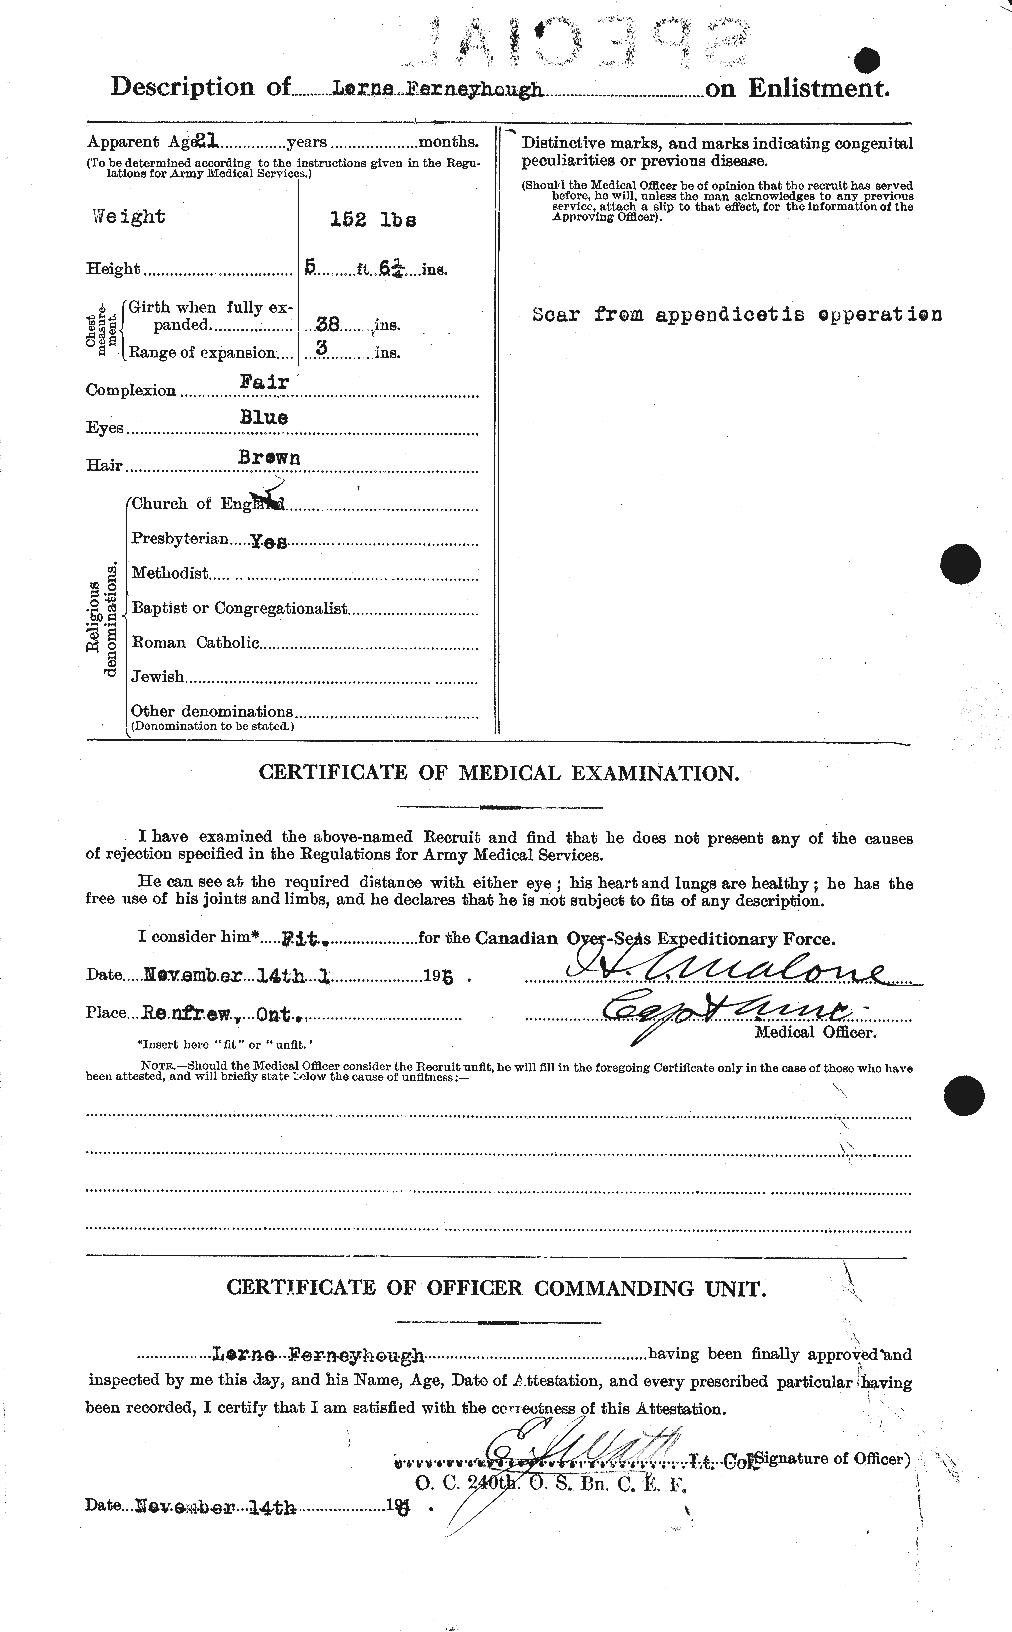 Personnel Records of the First World War - CEF 323583b